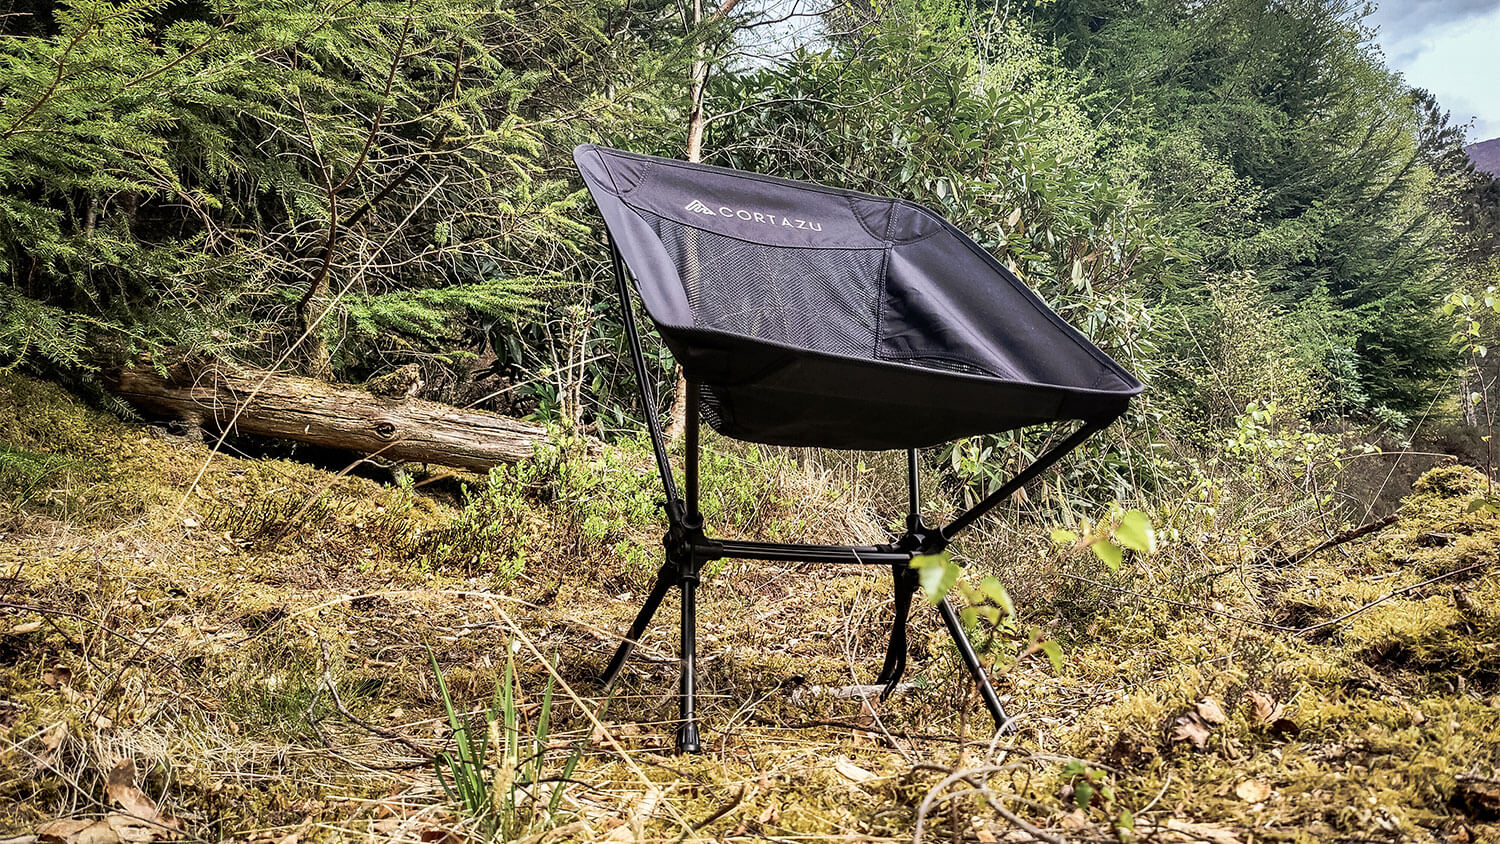 Extensive review of the new Outdoor Chair from Cortazu